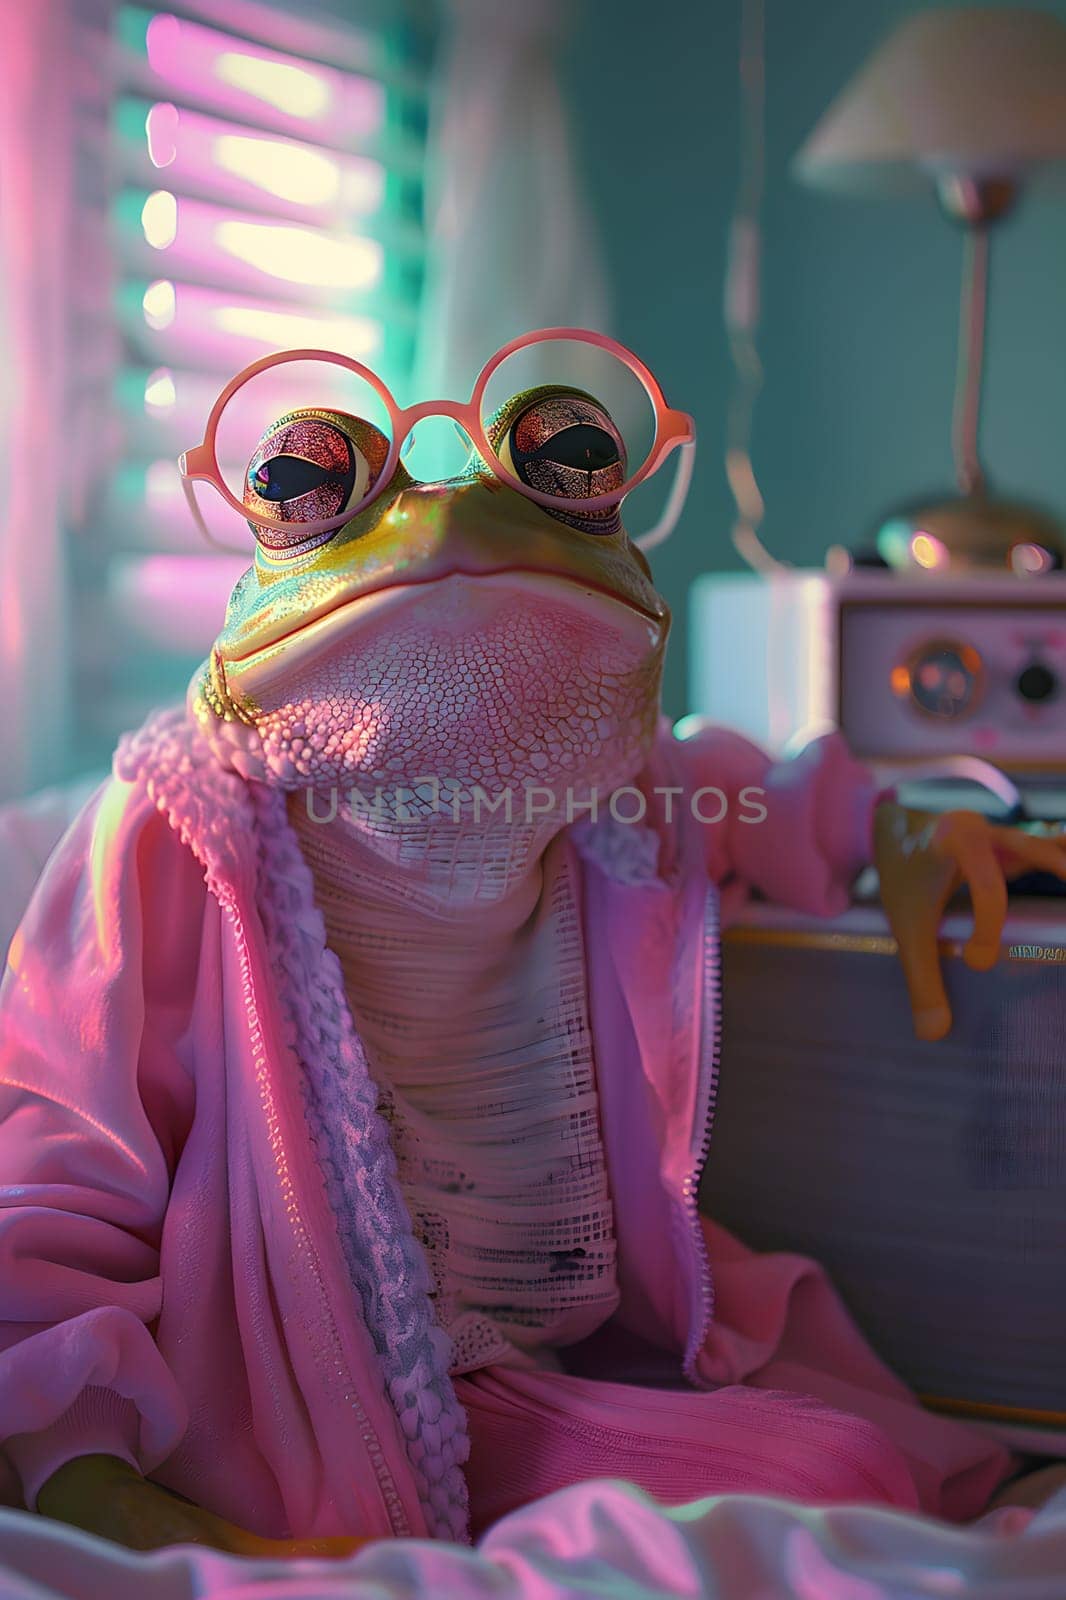 A frog with stylish purple eyewear and a pink robe sits on a bed, showcasing the importance of vision care and fun fashion design in entertainment events